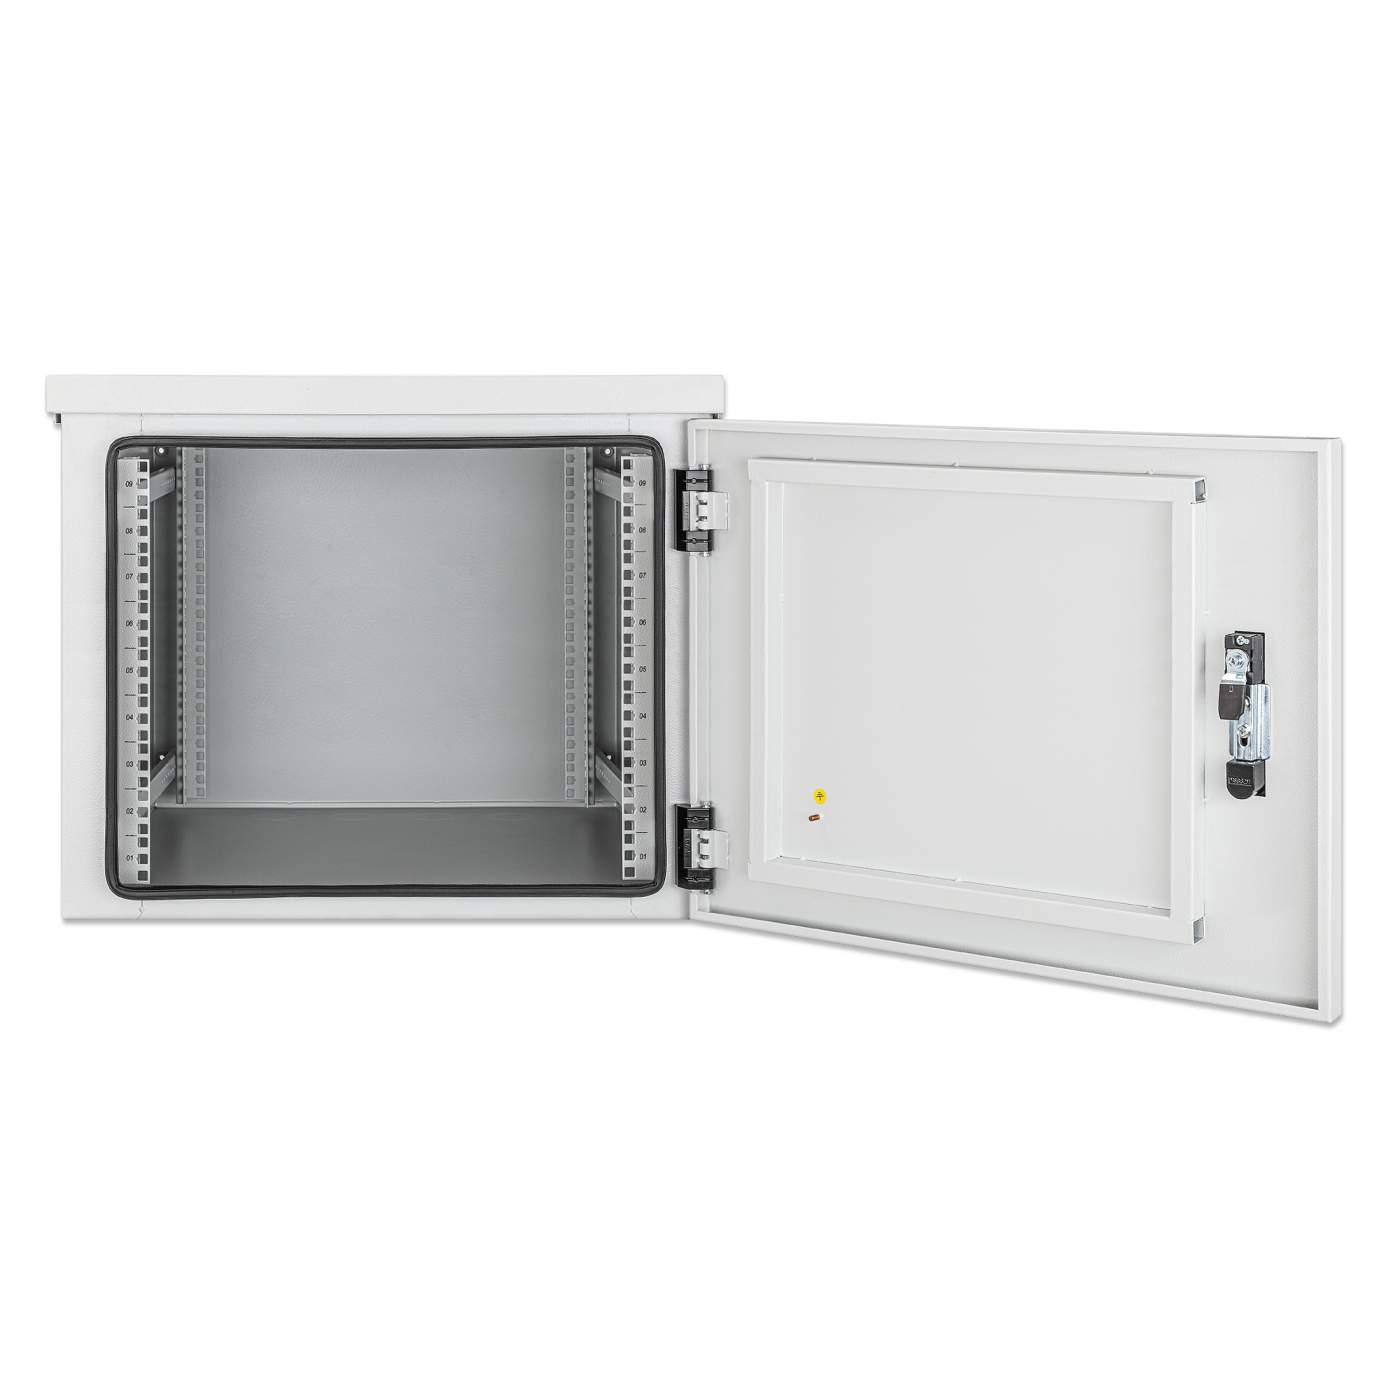 Industrial IP55 19" Wall Mount Cabinet with Integrated Fans, 9U Image 5